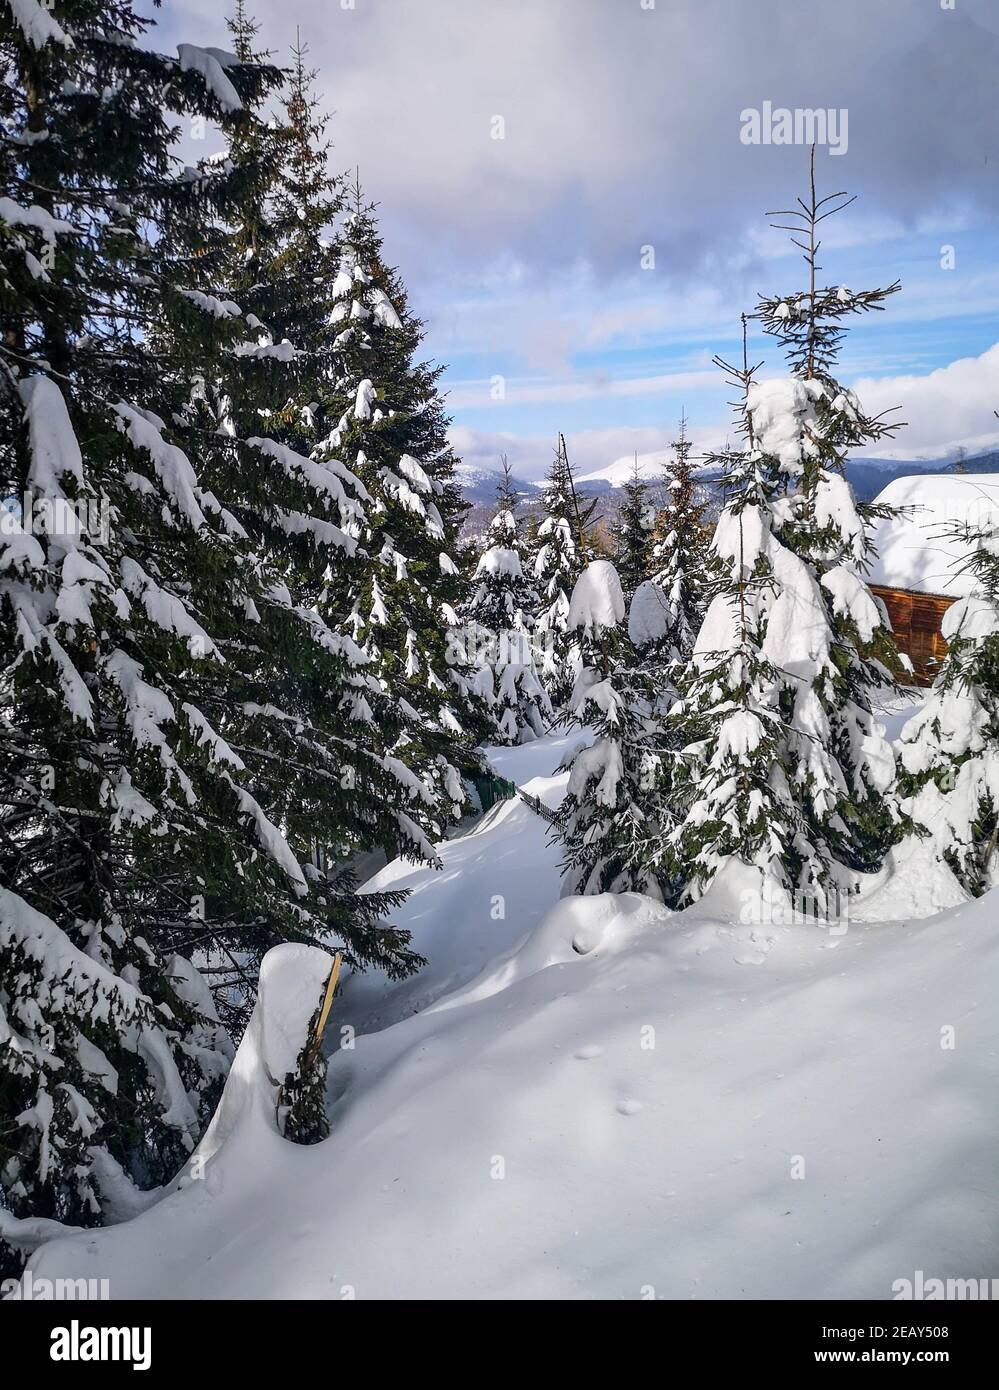 Winter view from a lodge in the mountains with evergreen trees covered in snow and cloudy skies, in Ranca, Romania Stock Photo